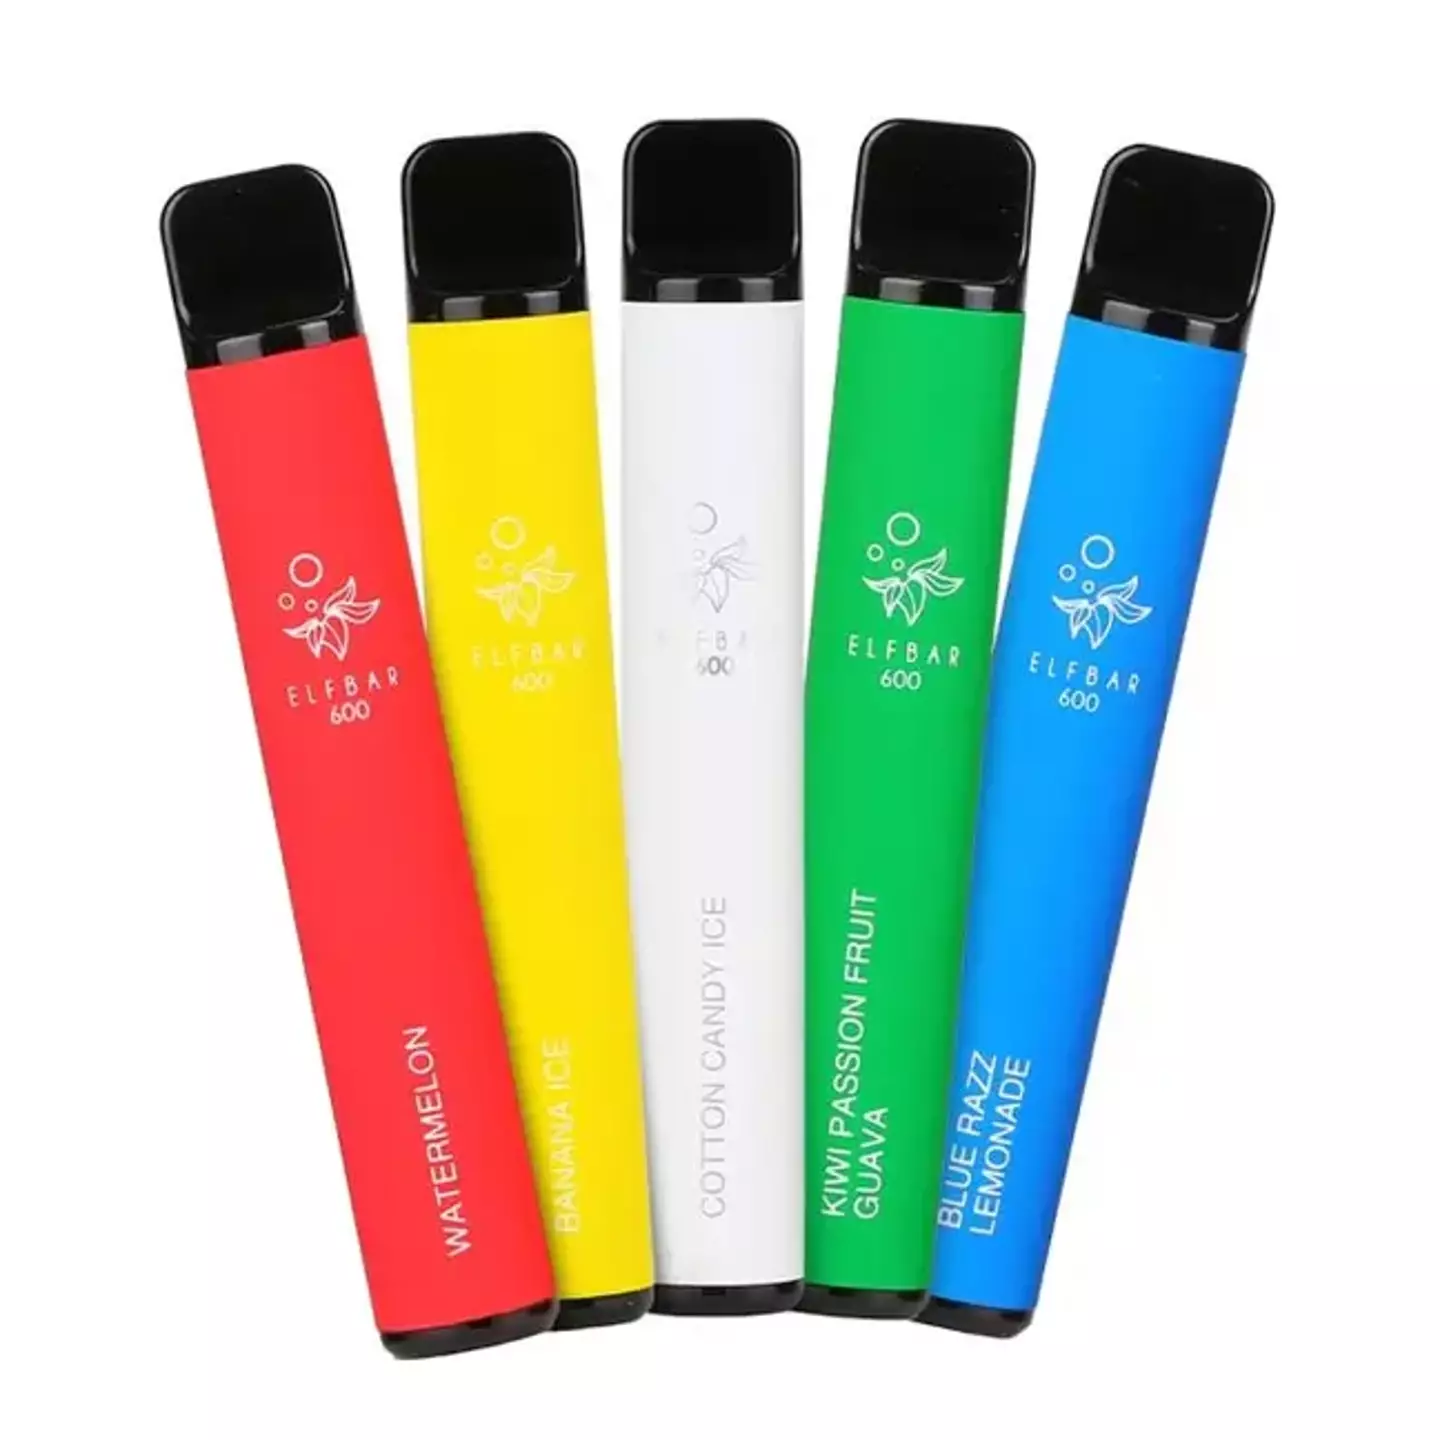 Elf Bar vapes have been removed from shelves following illegal nicotine levels.